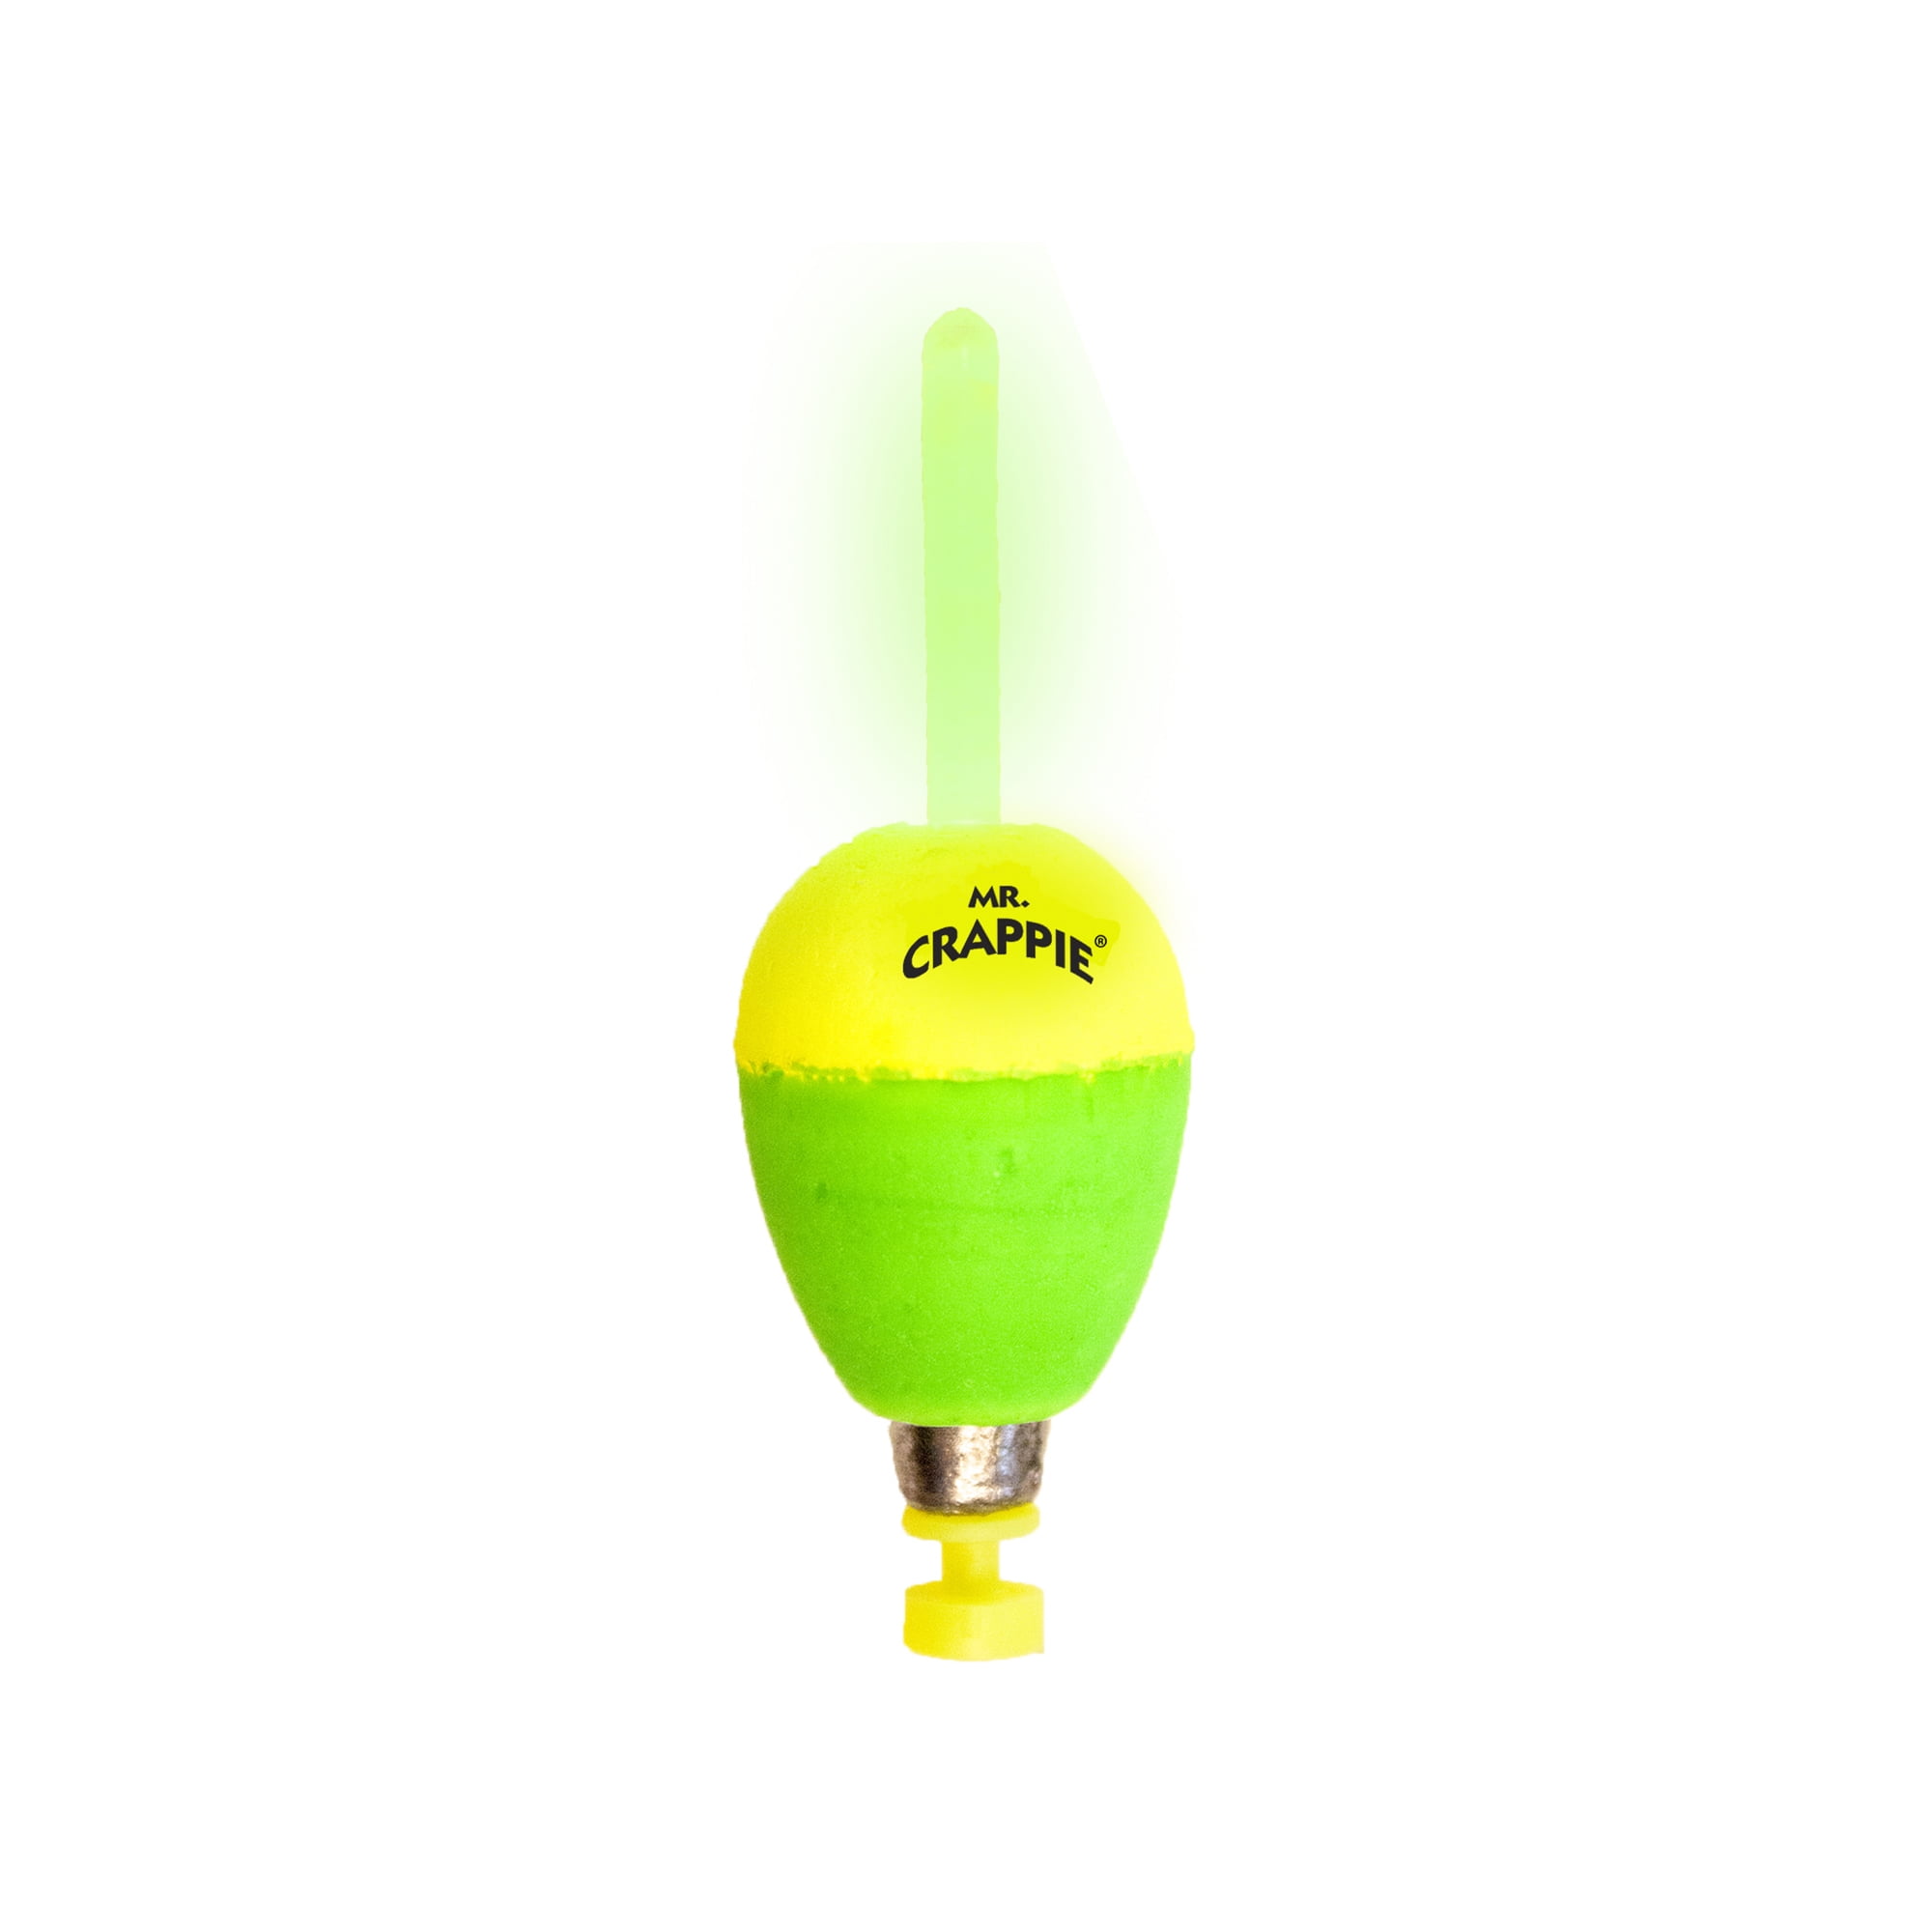 Mr Crappie Flo-Glo Lighted Bobber Yellow/Green 2 Pack M125W-2YG-GL